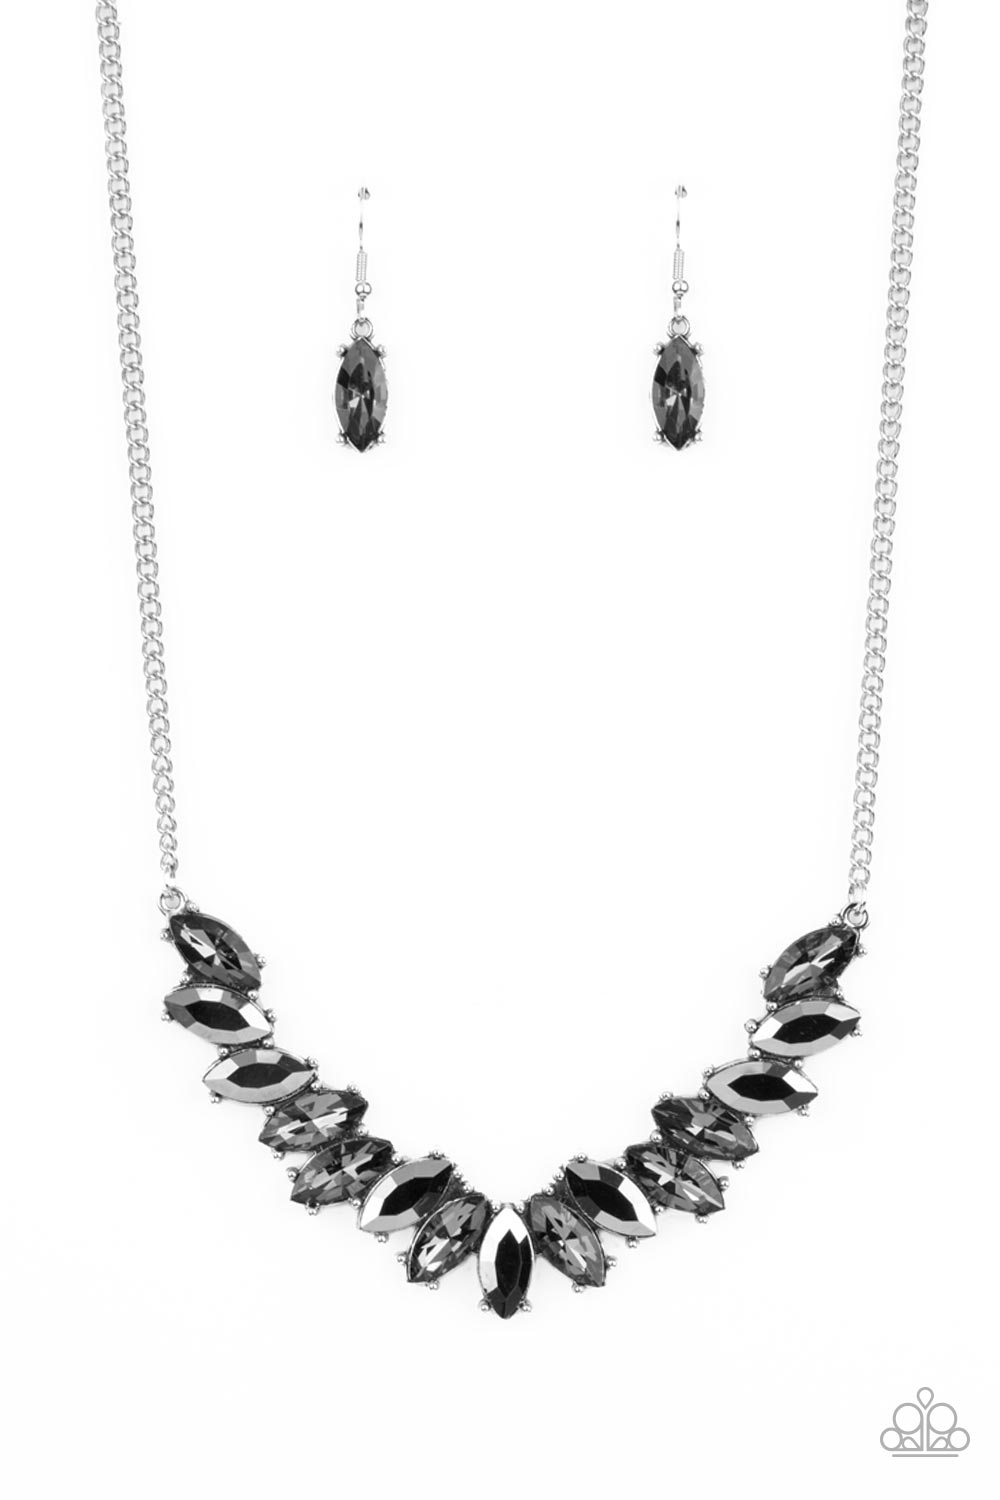 Galaxy Game-Changer Paparazzi Accessories Necklace with Earrings